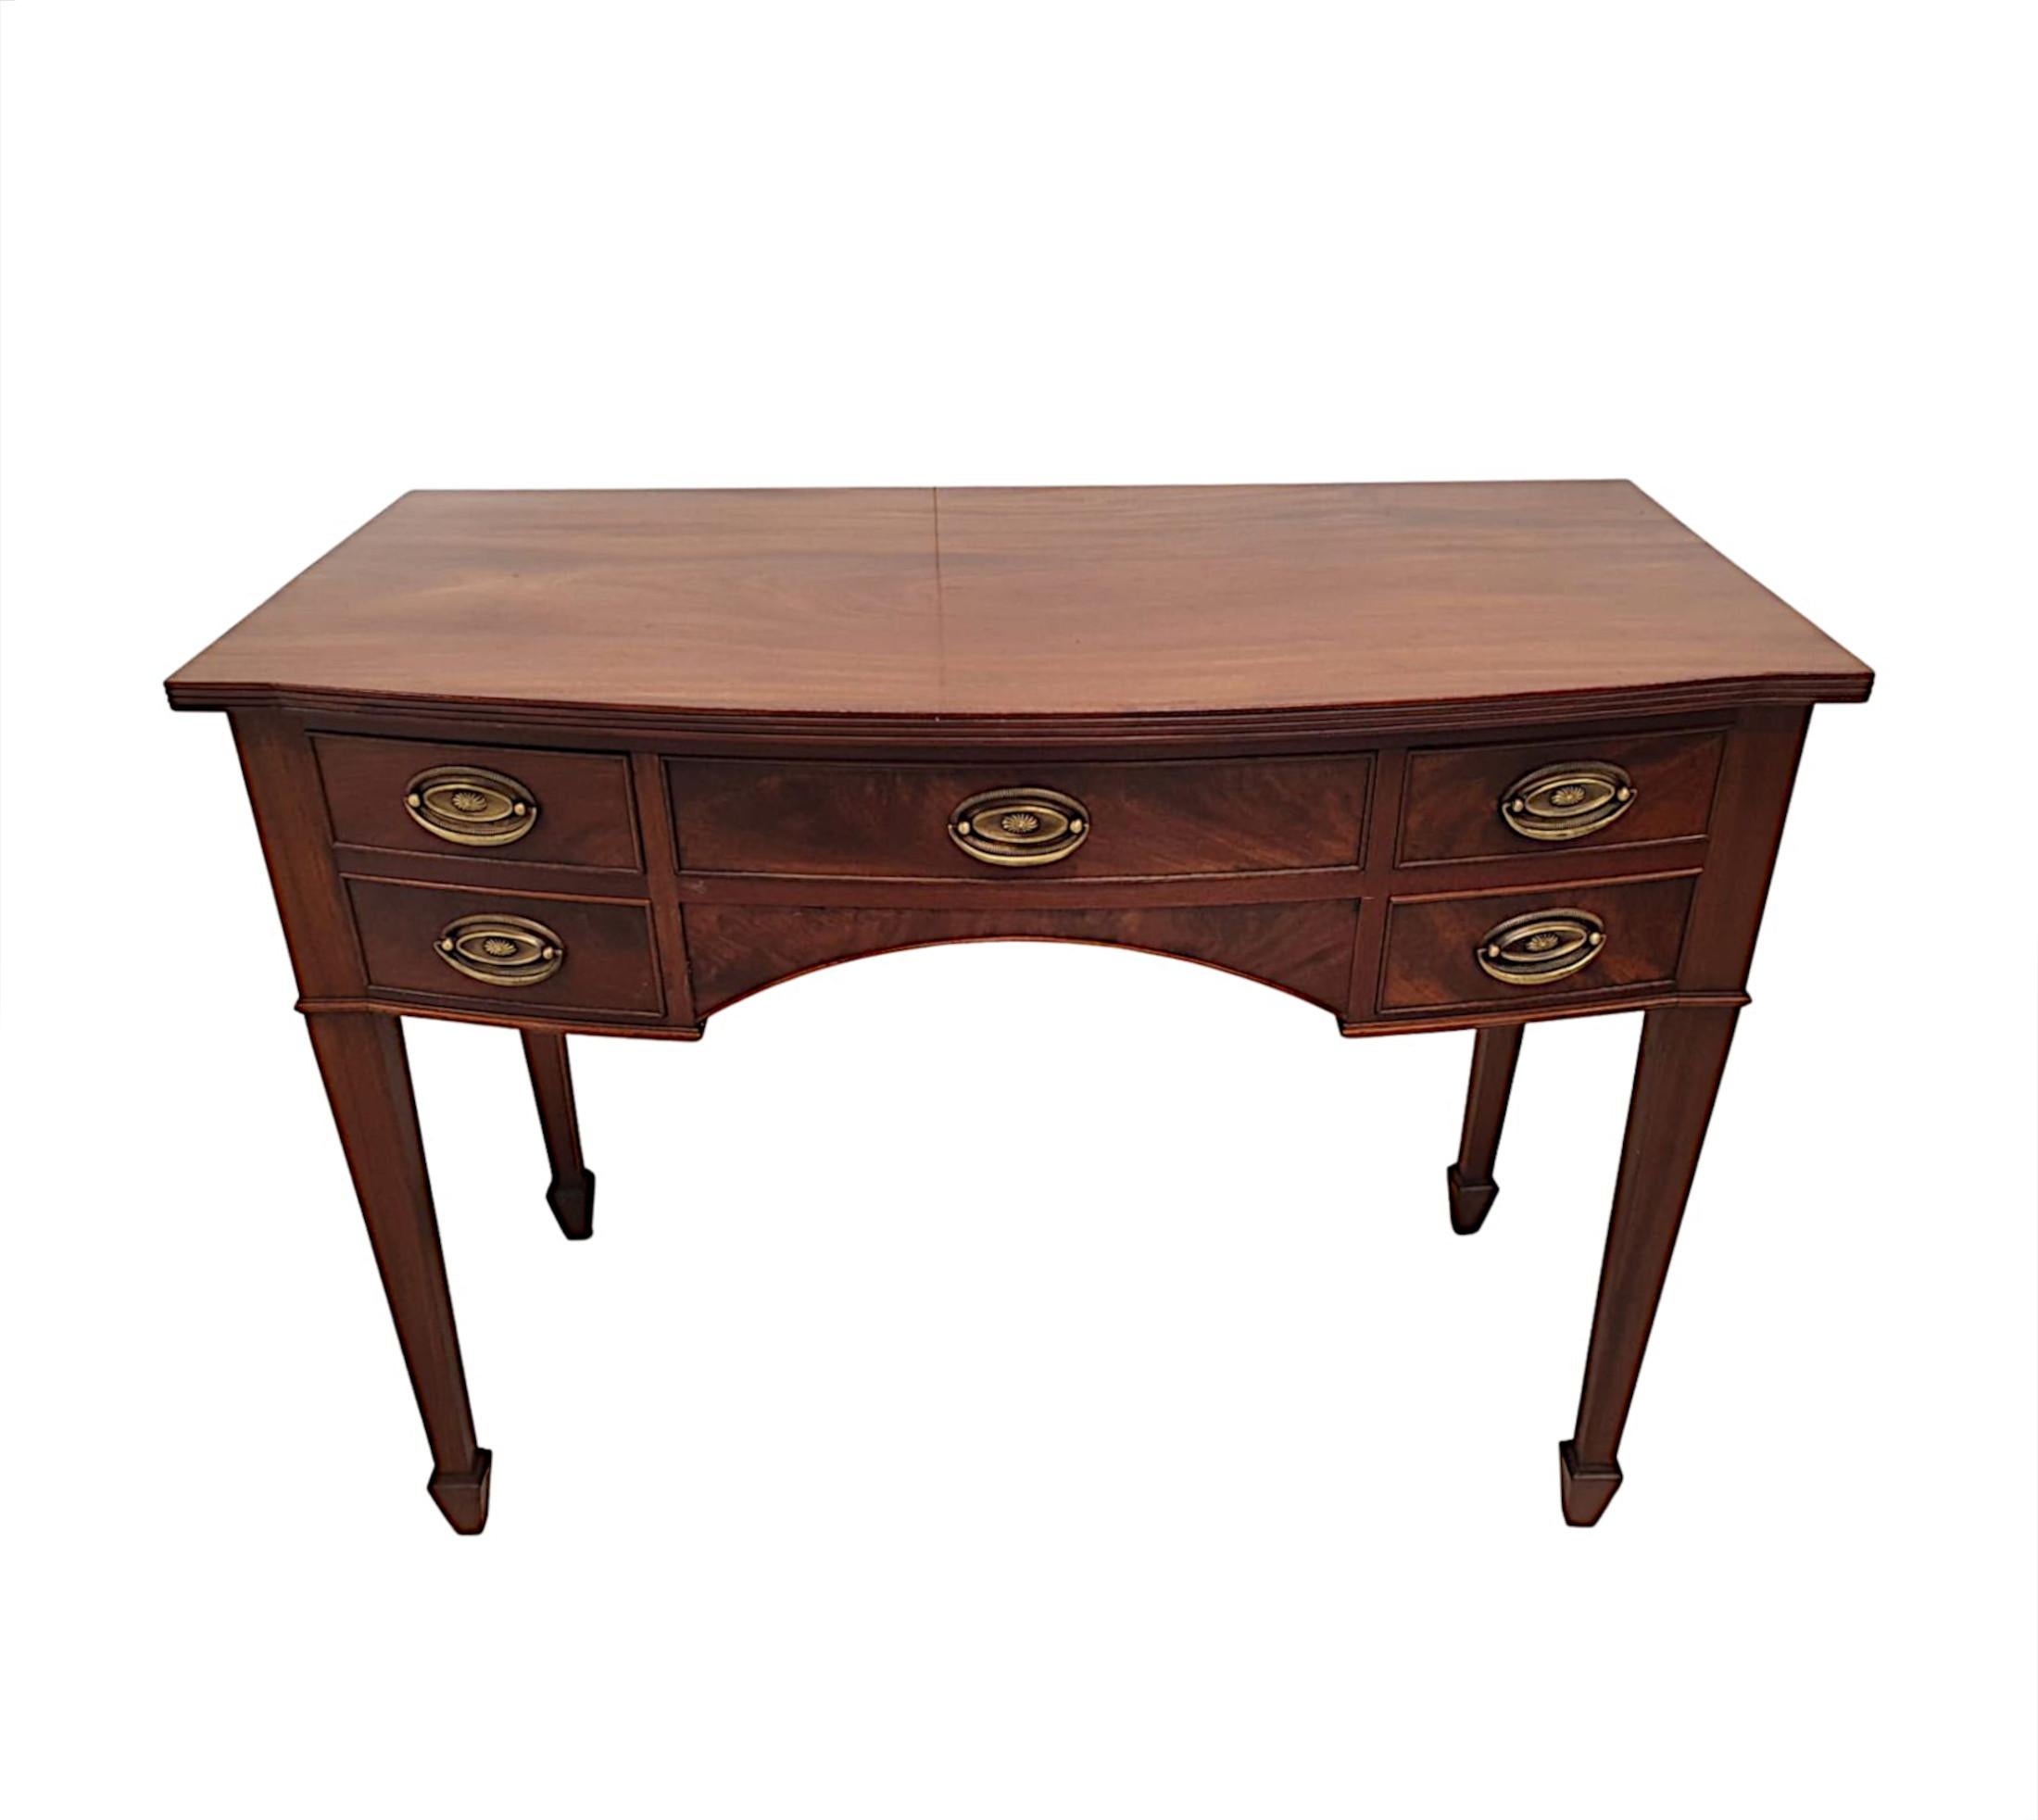 A fabulous Edwardian bowfront mahogany console or hall table, of exceptional quality and finely carved with gorgeously rich patination and grain. The shaped and moulded top with a beautiful reeded edge is raised above shaped frieze fitted with